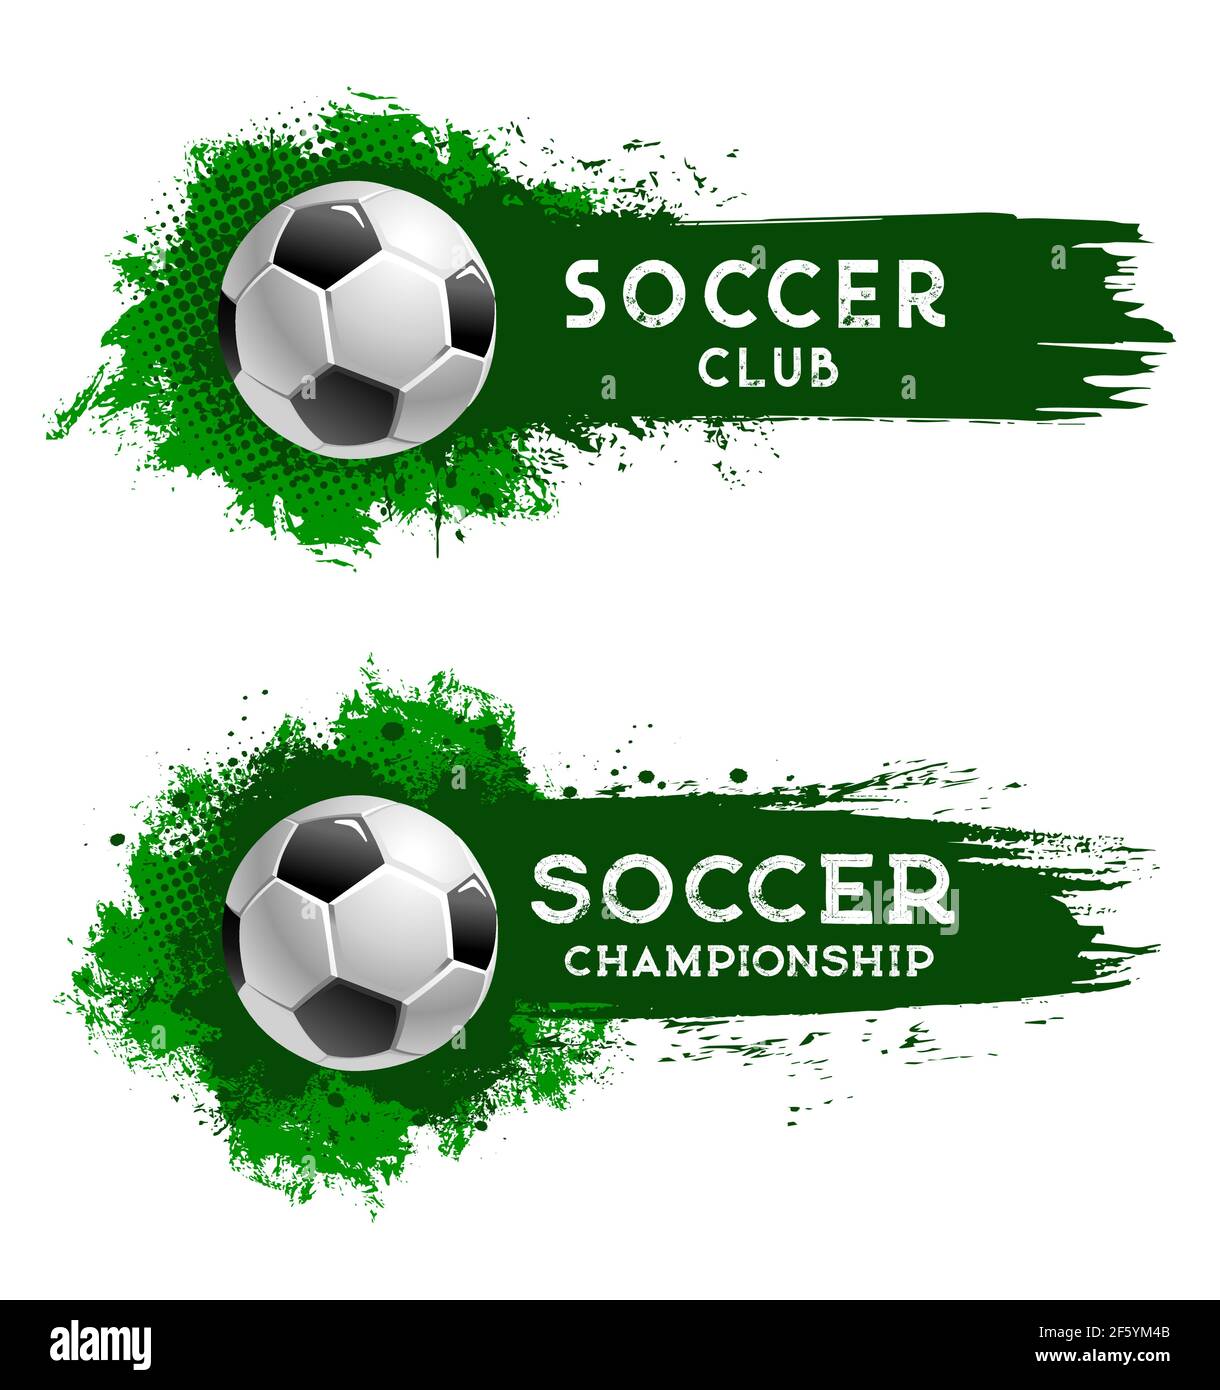 Premium Vector  Soccer championship broadcast background with